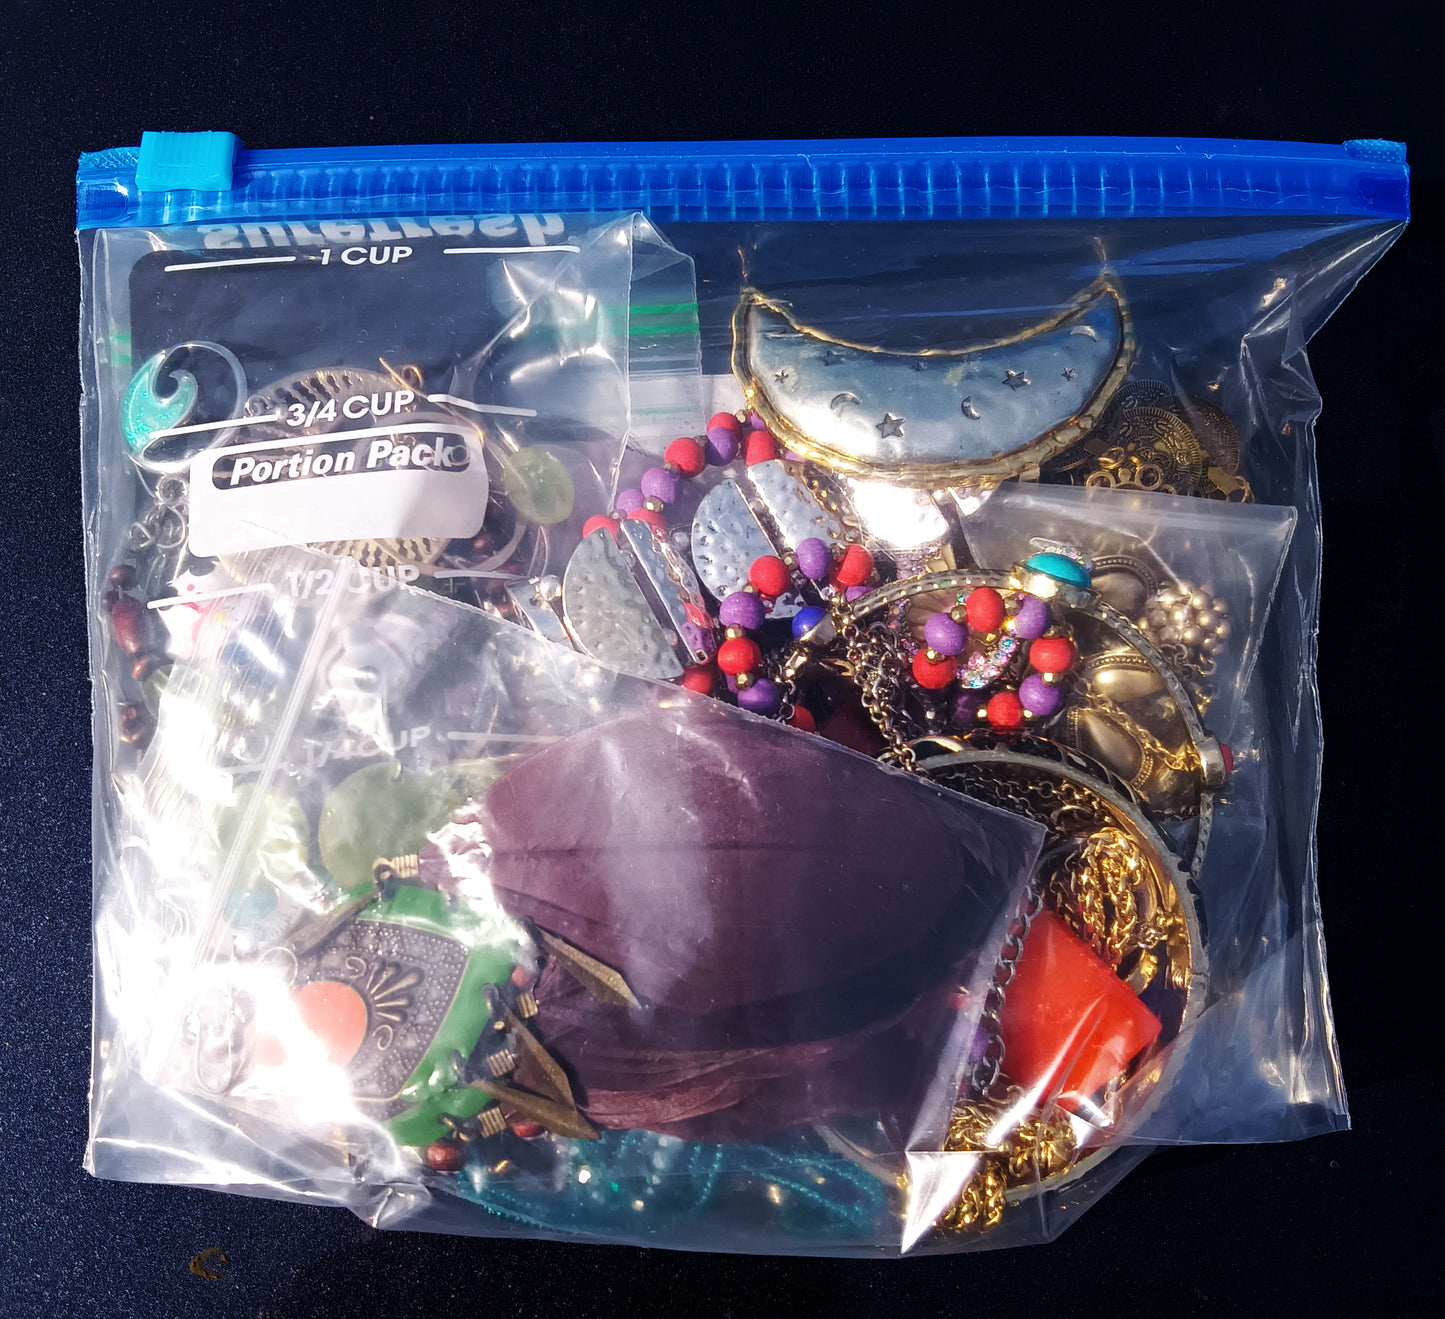 Mystery Mixed Costume Jewelry Bag - 1 Pound - No. 25